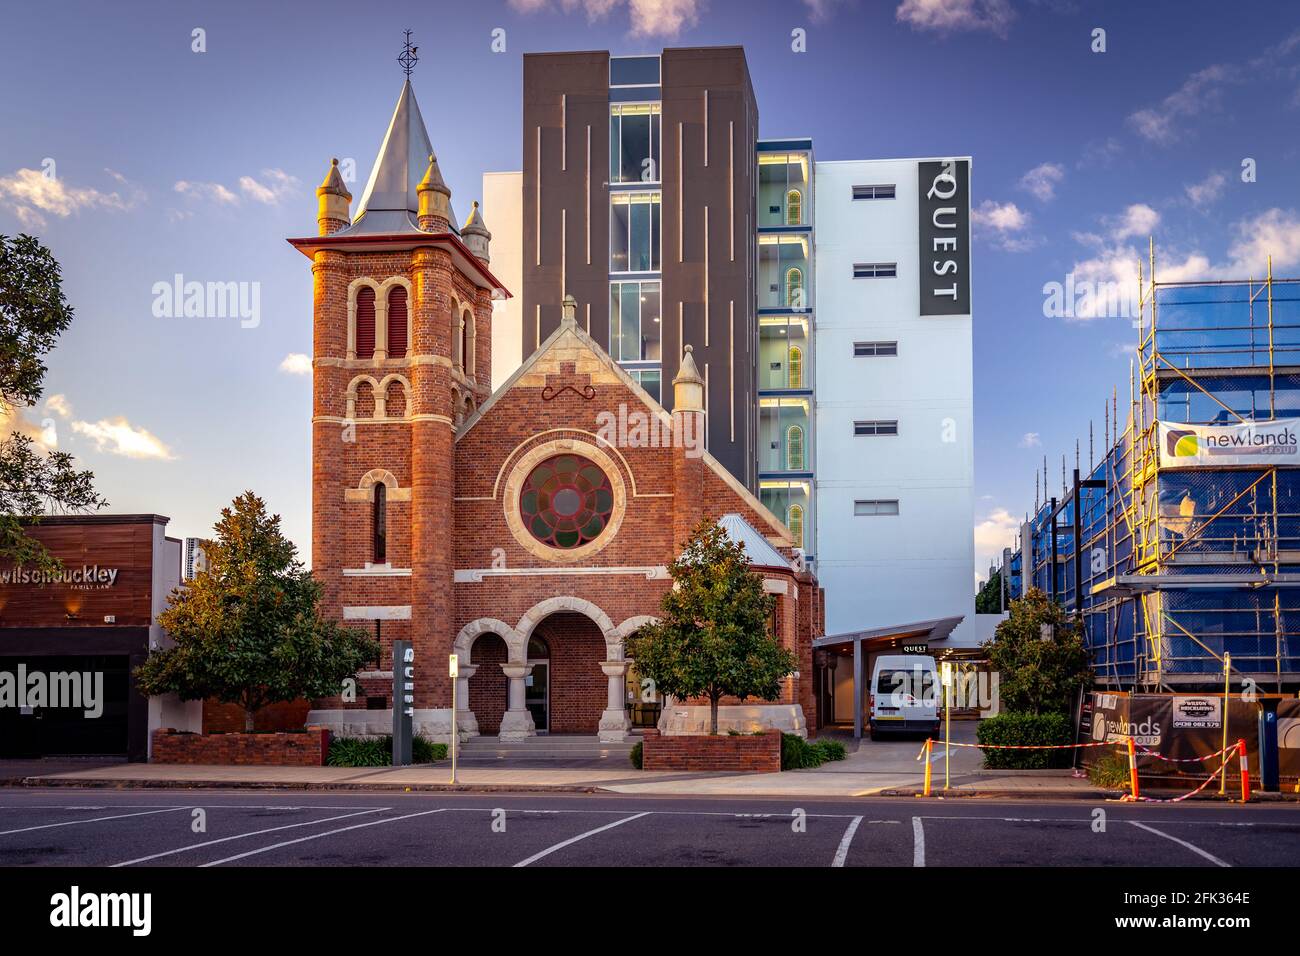 Toowoomba, Queensland, Australia - Quest hotel built above the converted church building Stock Photo